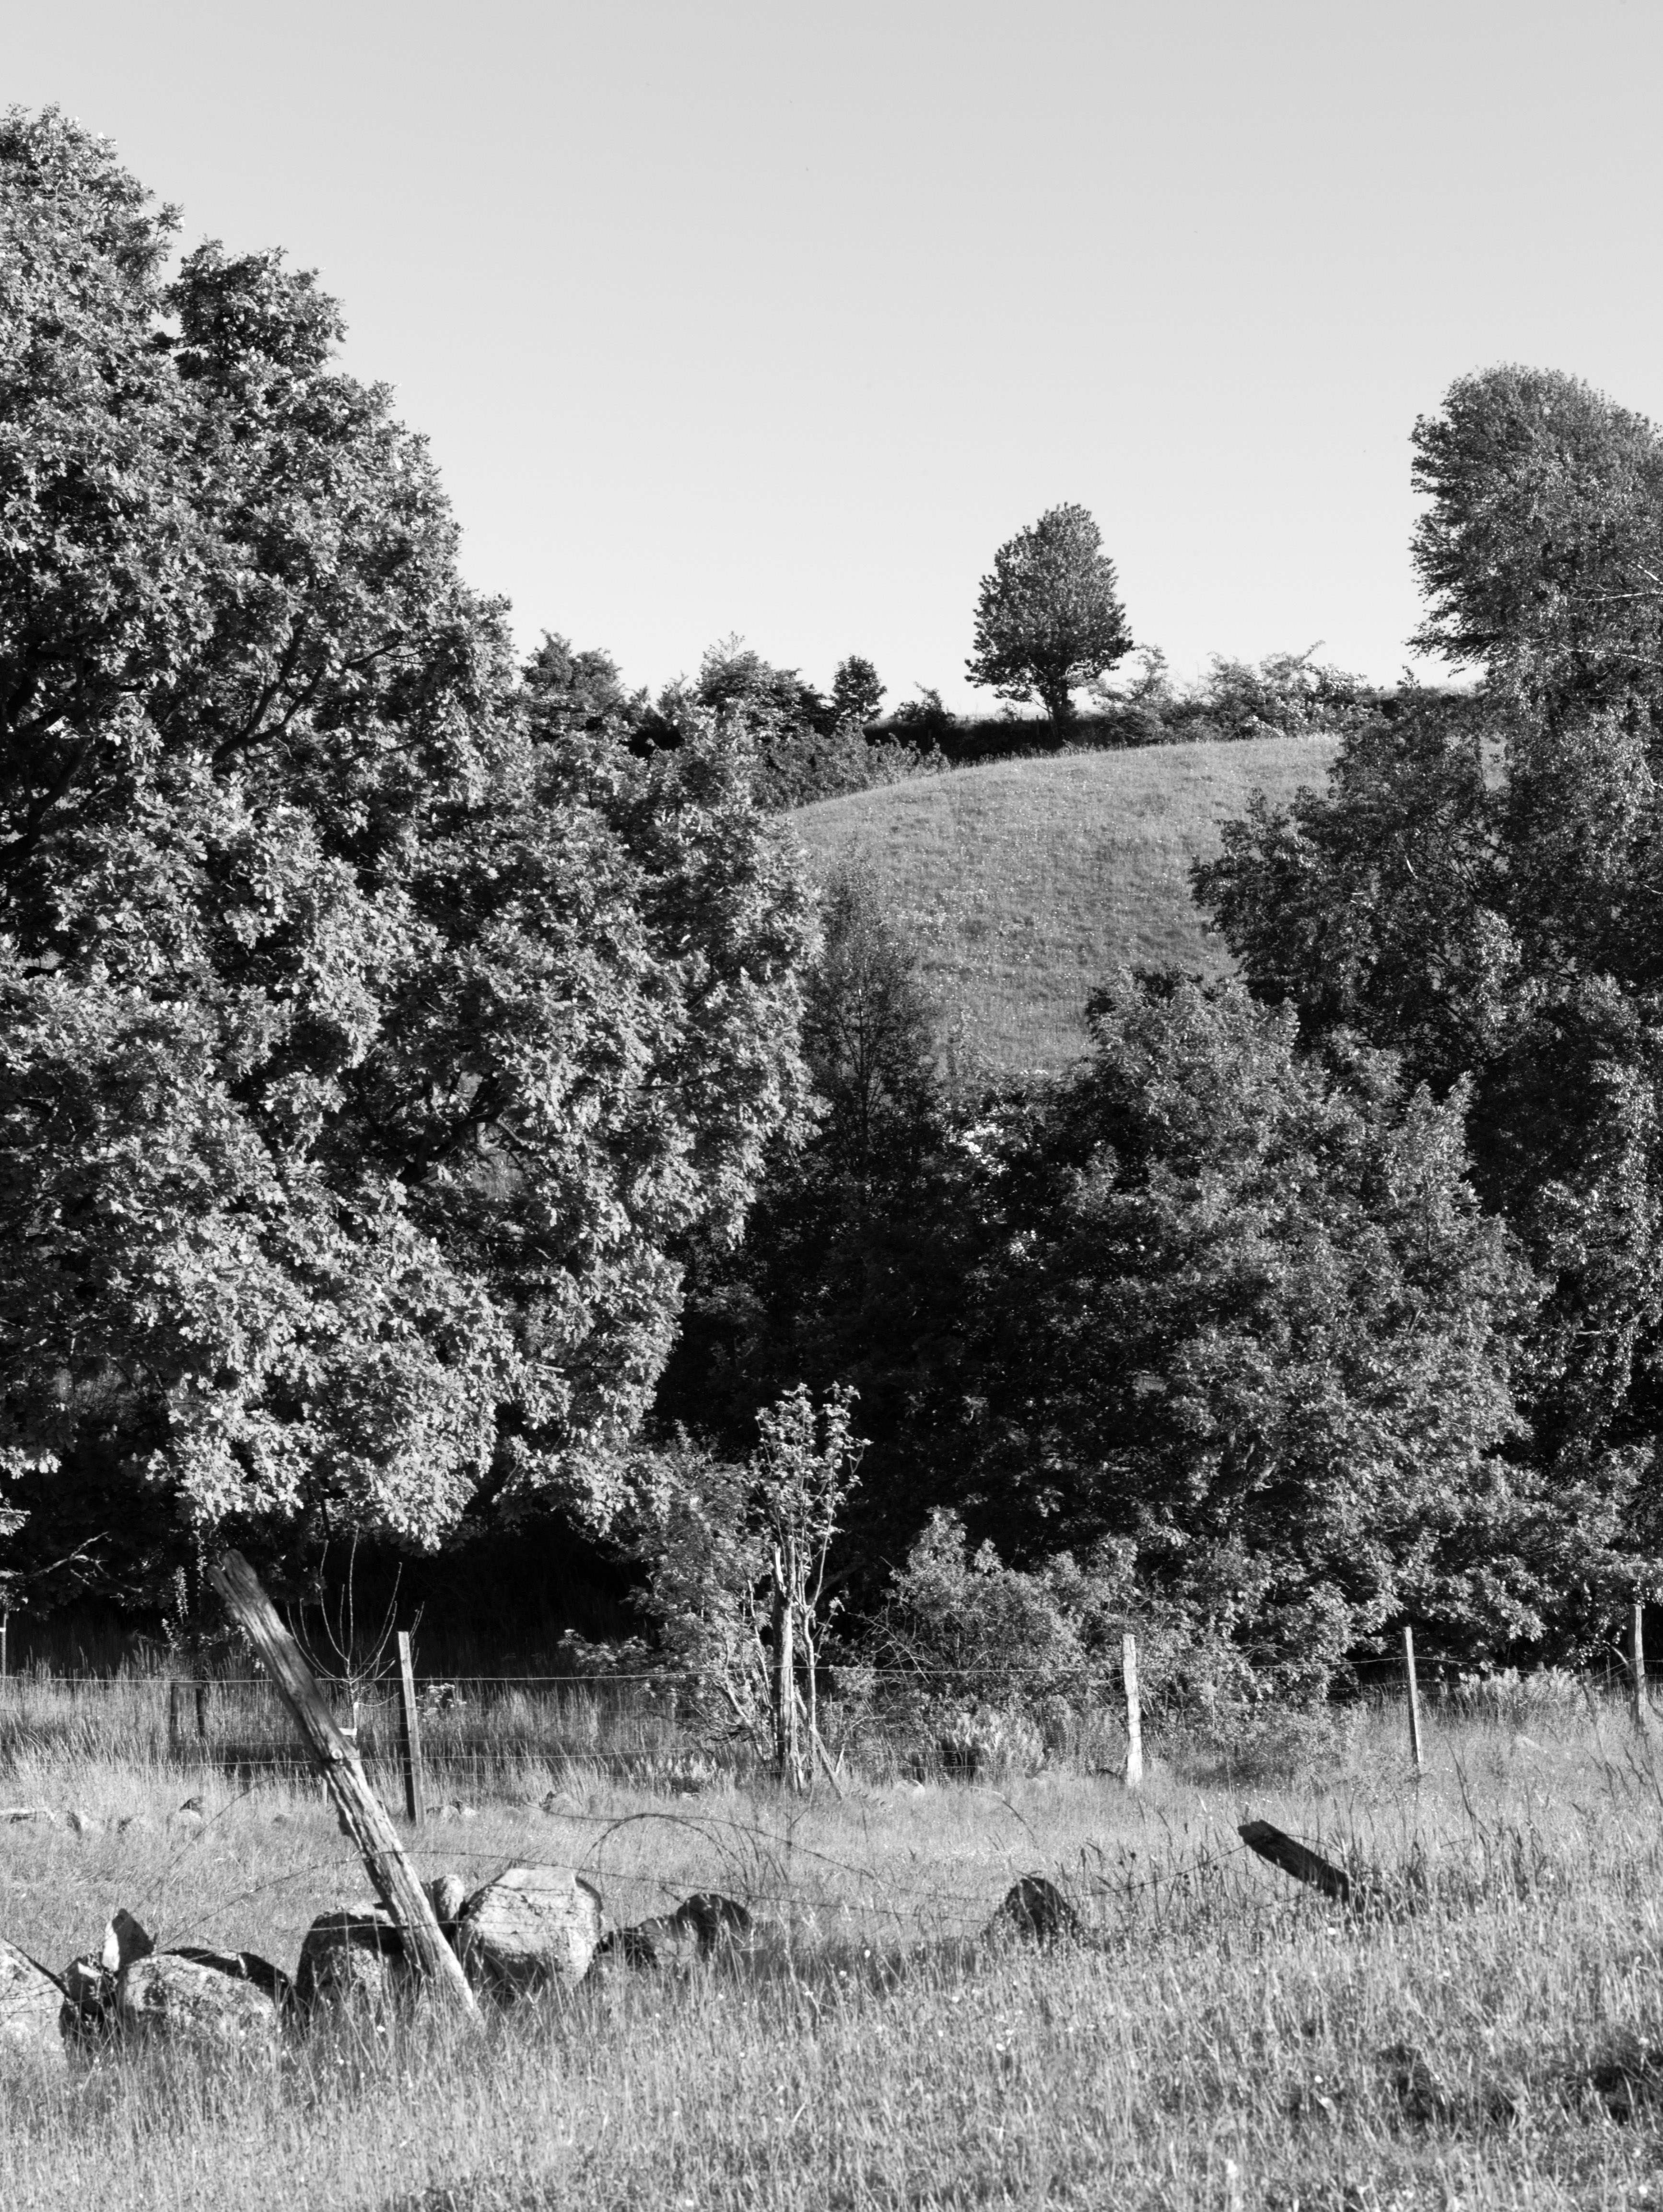 A tree on the hill at Brösarps backar (Brösarp, Sweden) with Leica M Monochrom (Leica Macro-Elmar-M 90mm f/4) by Magnus L Andersson (photography.anderssoneklund.se) at 2013-06-06 18:01:44